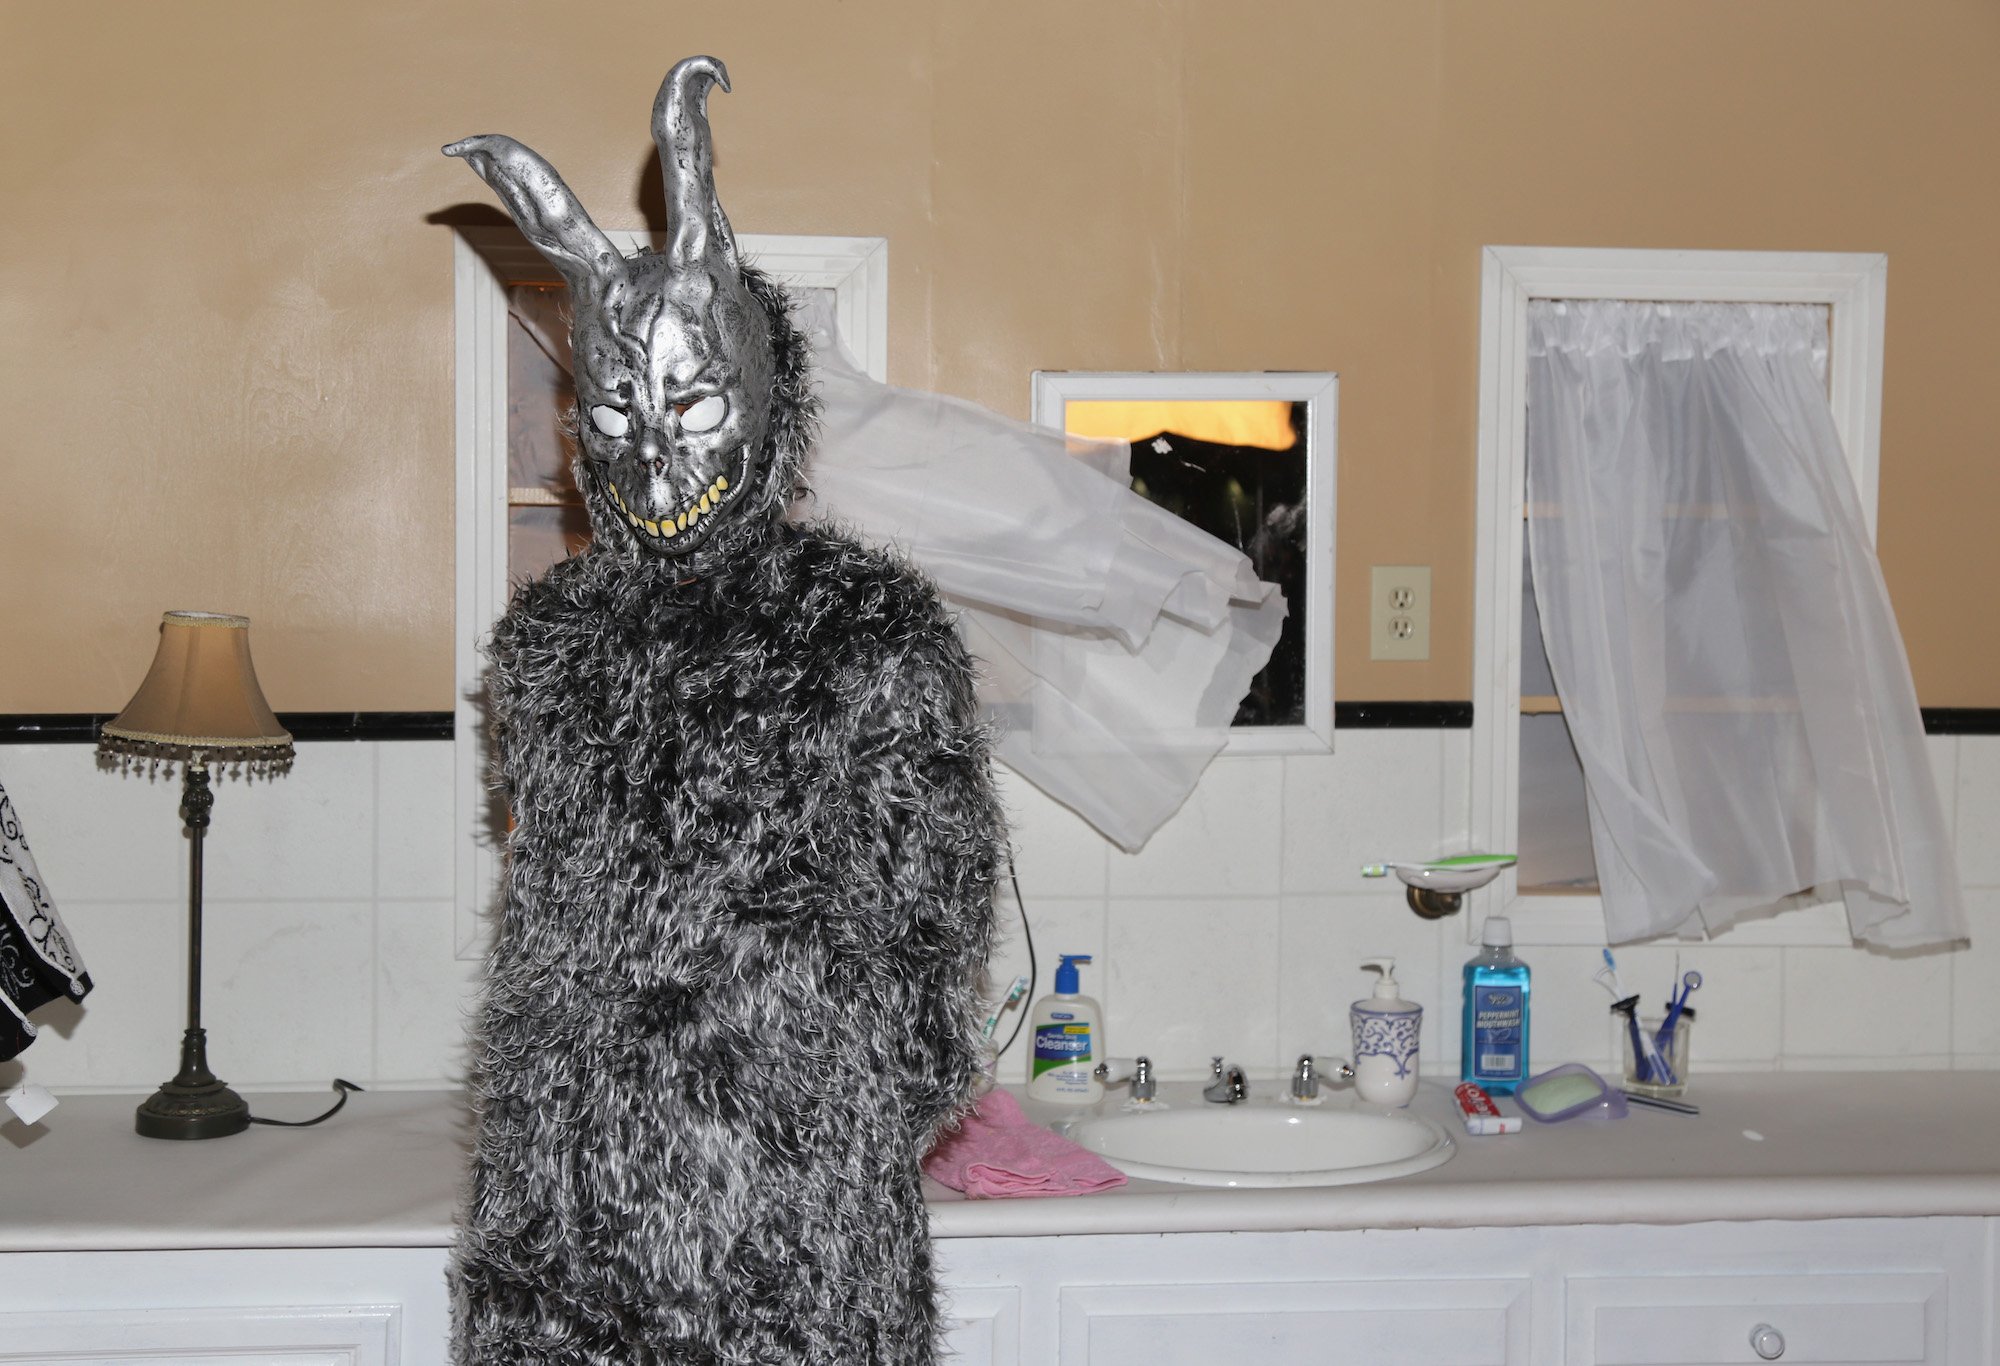 Frank (character in rabbit suit) from 'Donnie Darko' in a bathroom